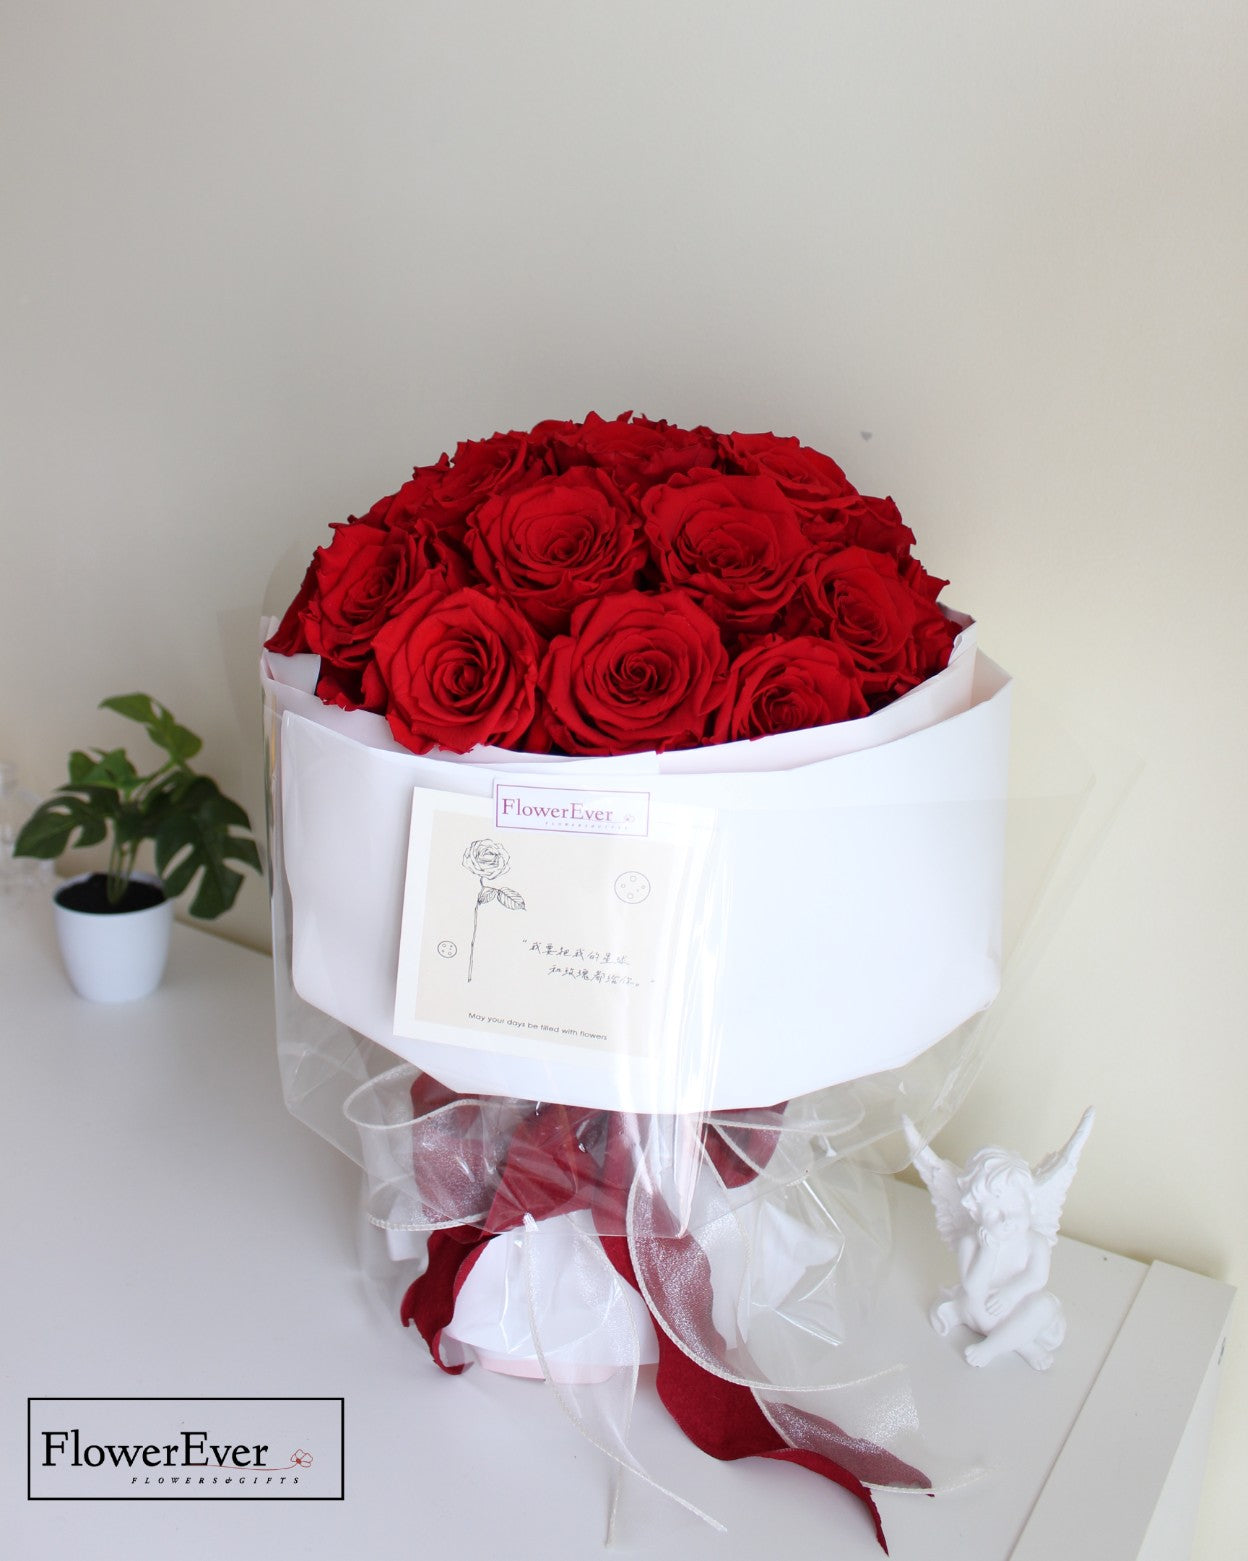 Round Red Rose Bouquet With Diamonds